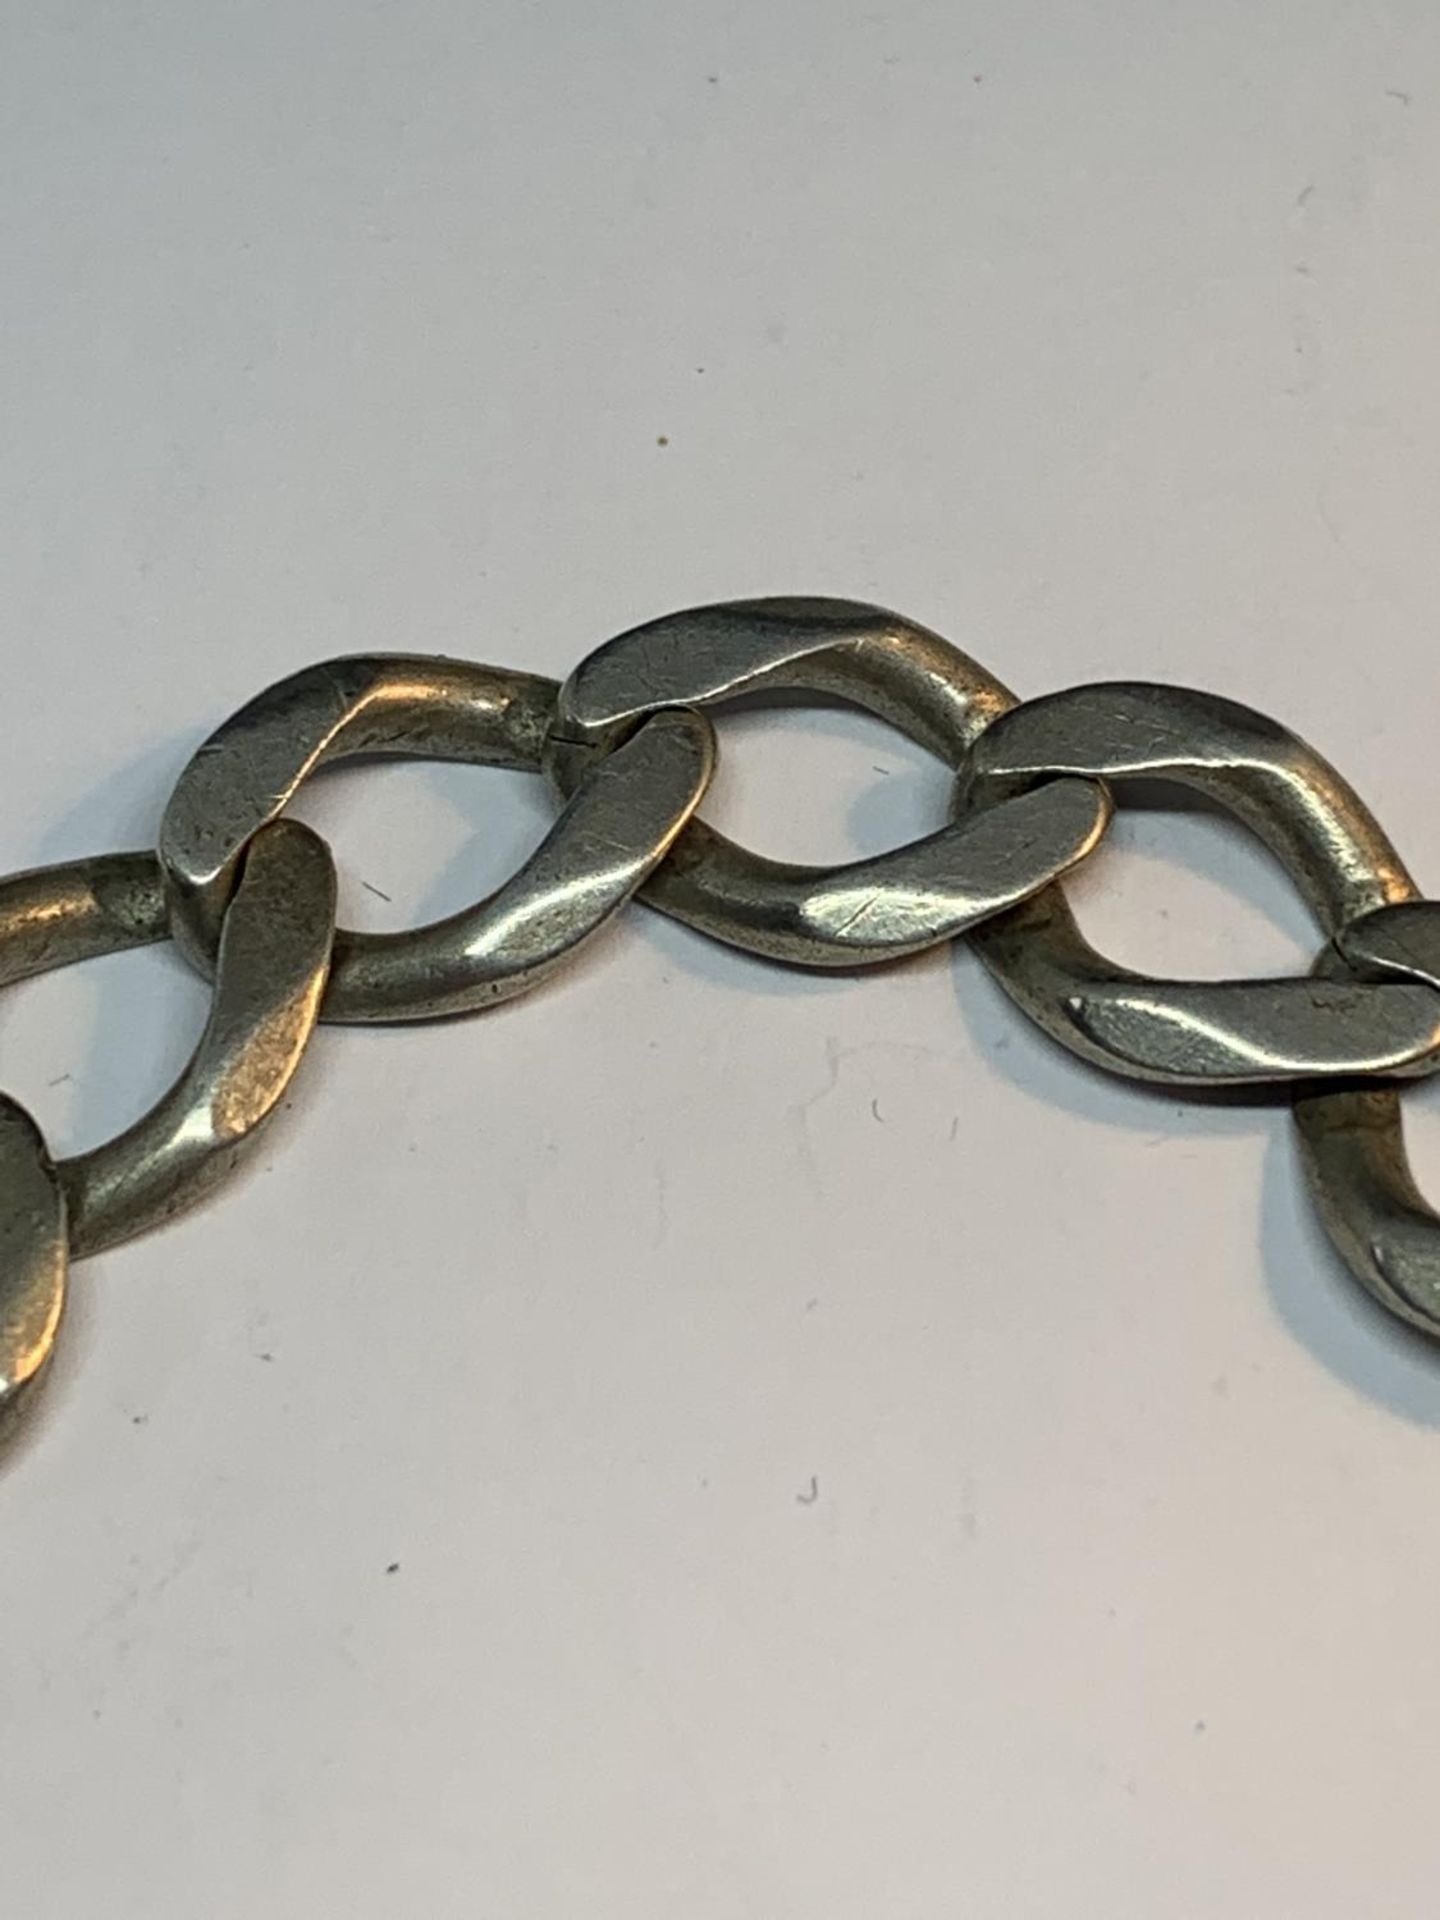 A SILVER FLAT LINK WRIST CHAIN - Image 2 of 4